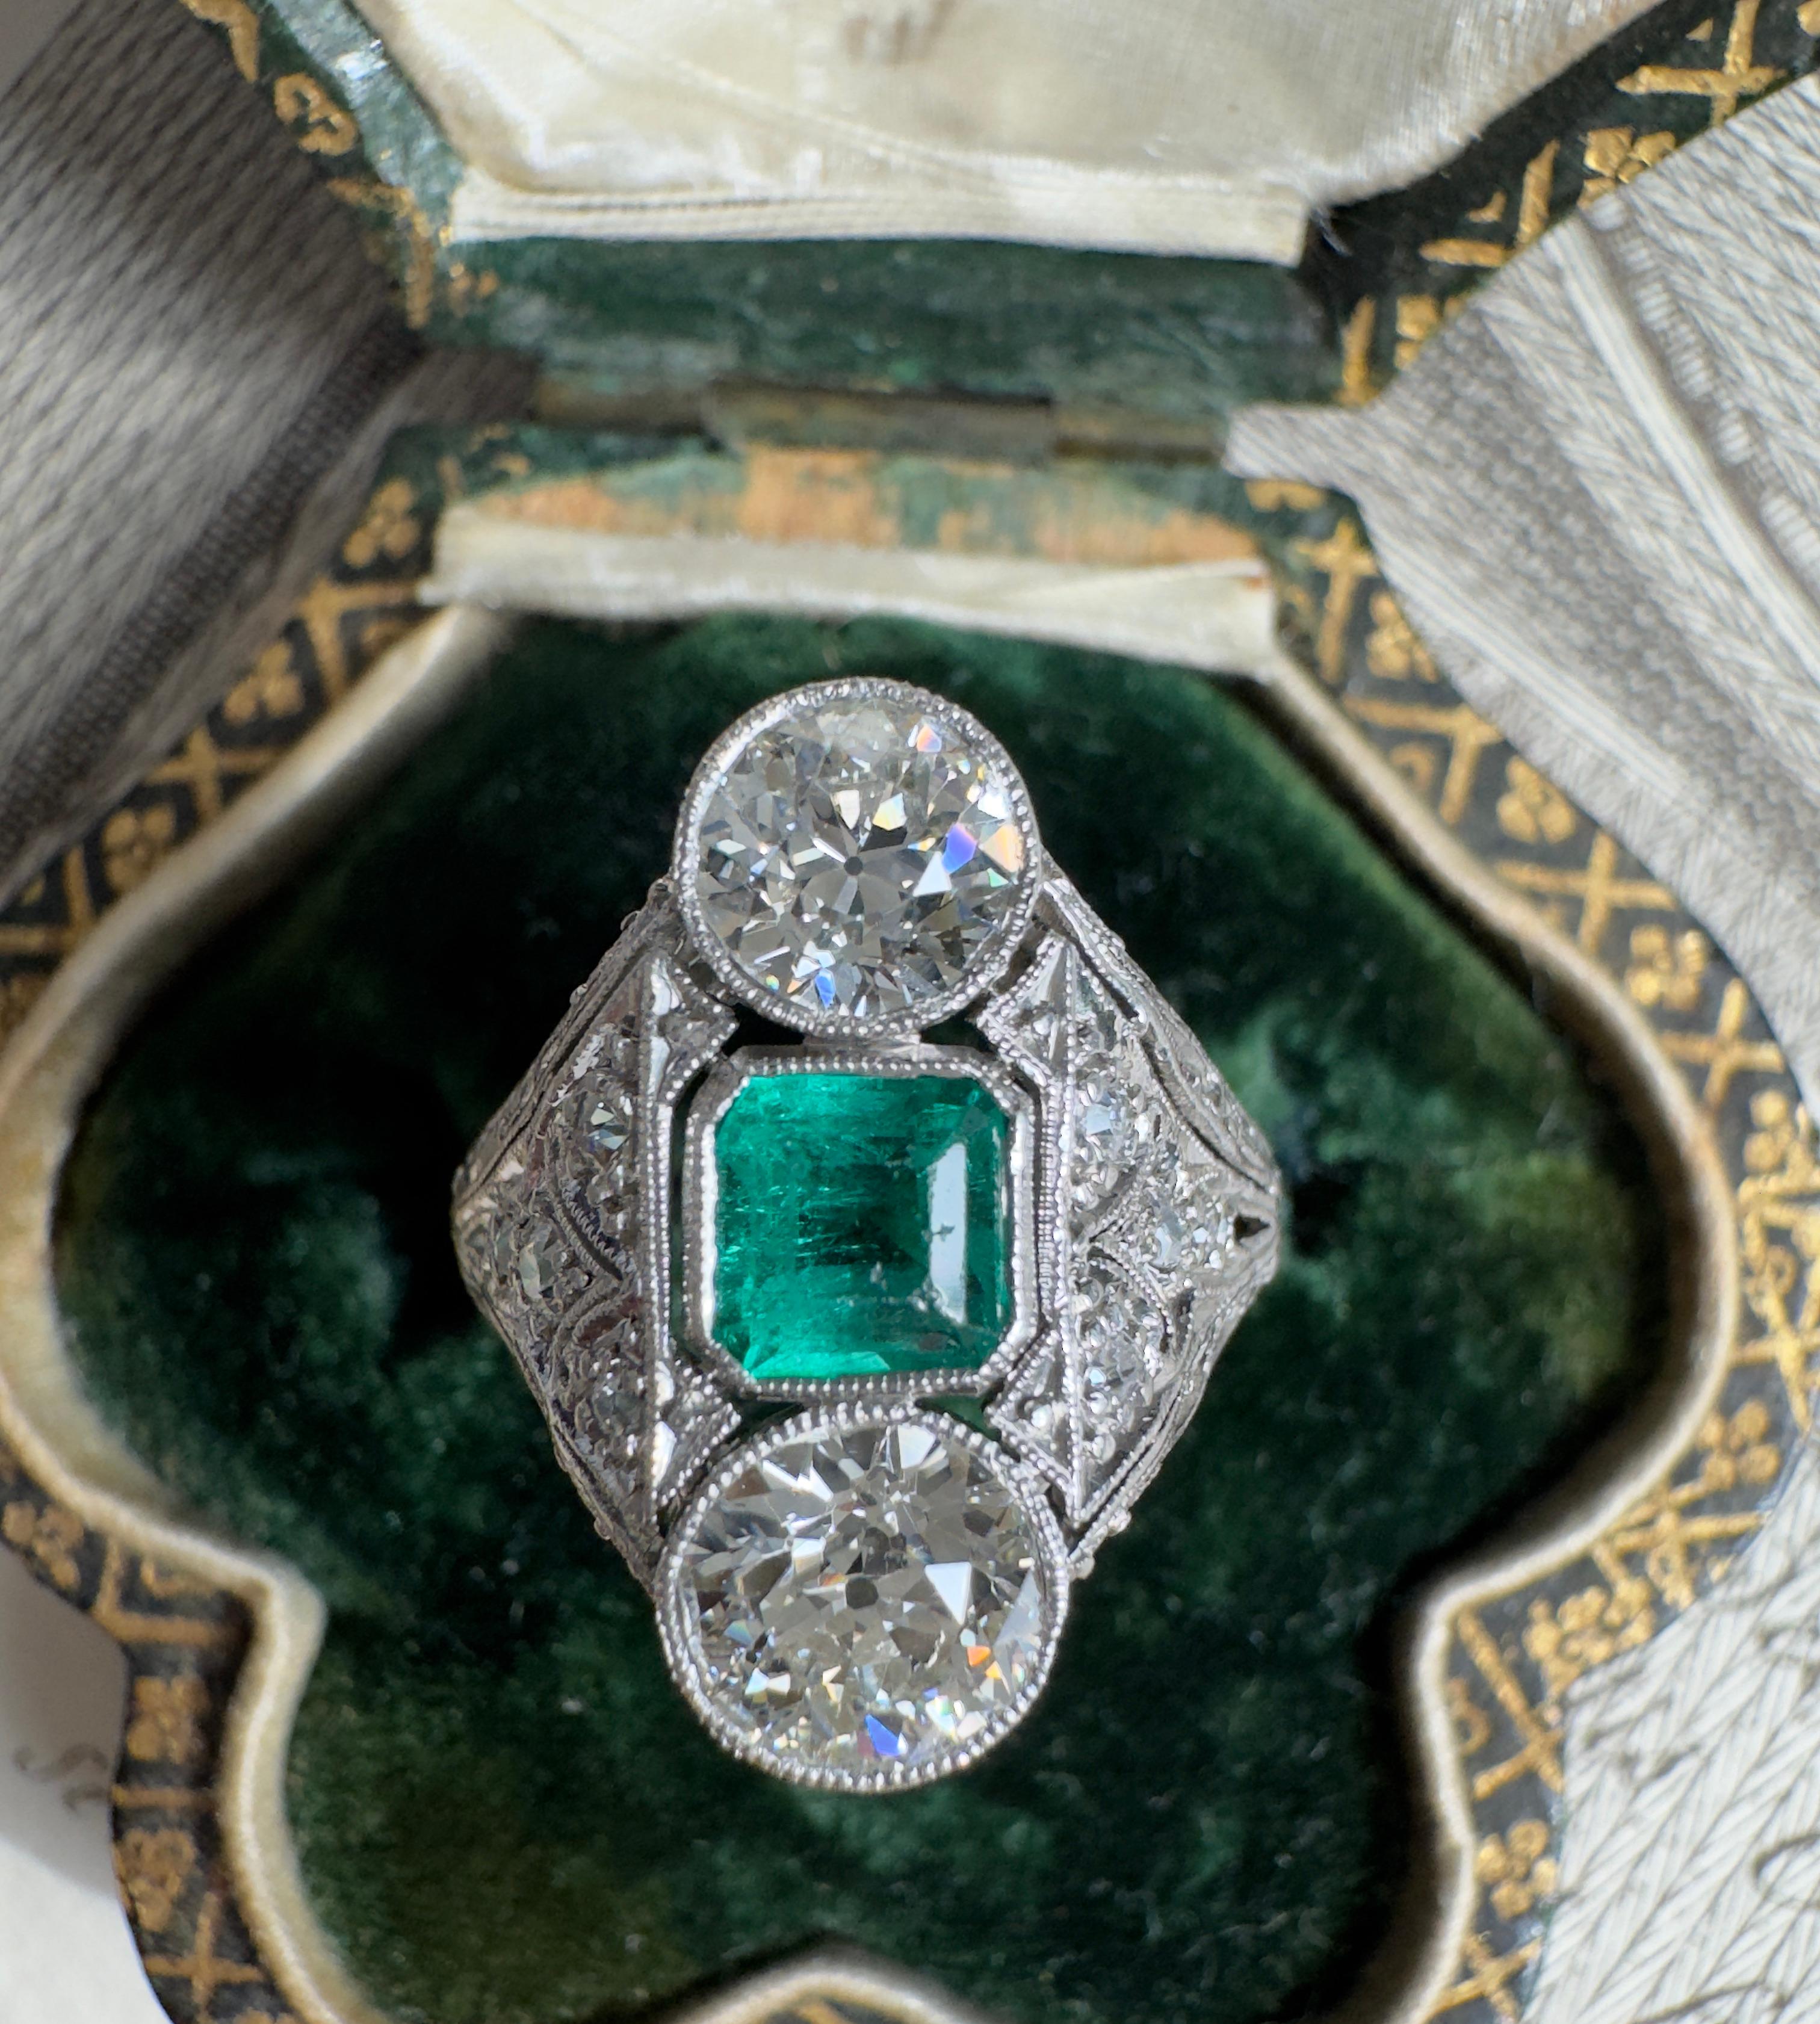 This charming early Art Deco ring centers on a glowing Colombian emerald, weighing .60 carat, embraced by a pair of sparkling European-cut diamonds. Low profile and finger hugging, the platinum setting frames the trio with soft shoulders aglitter